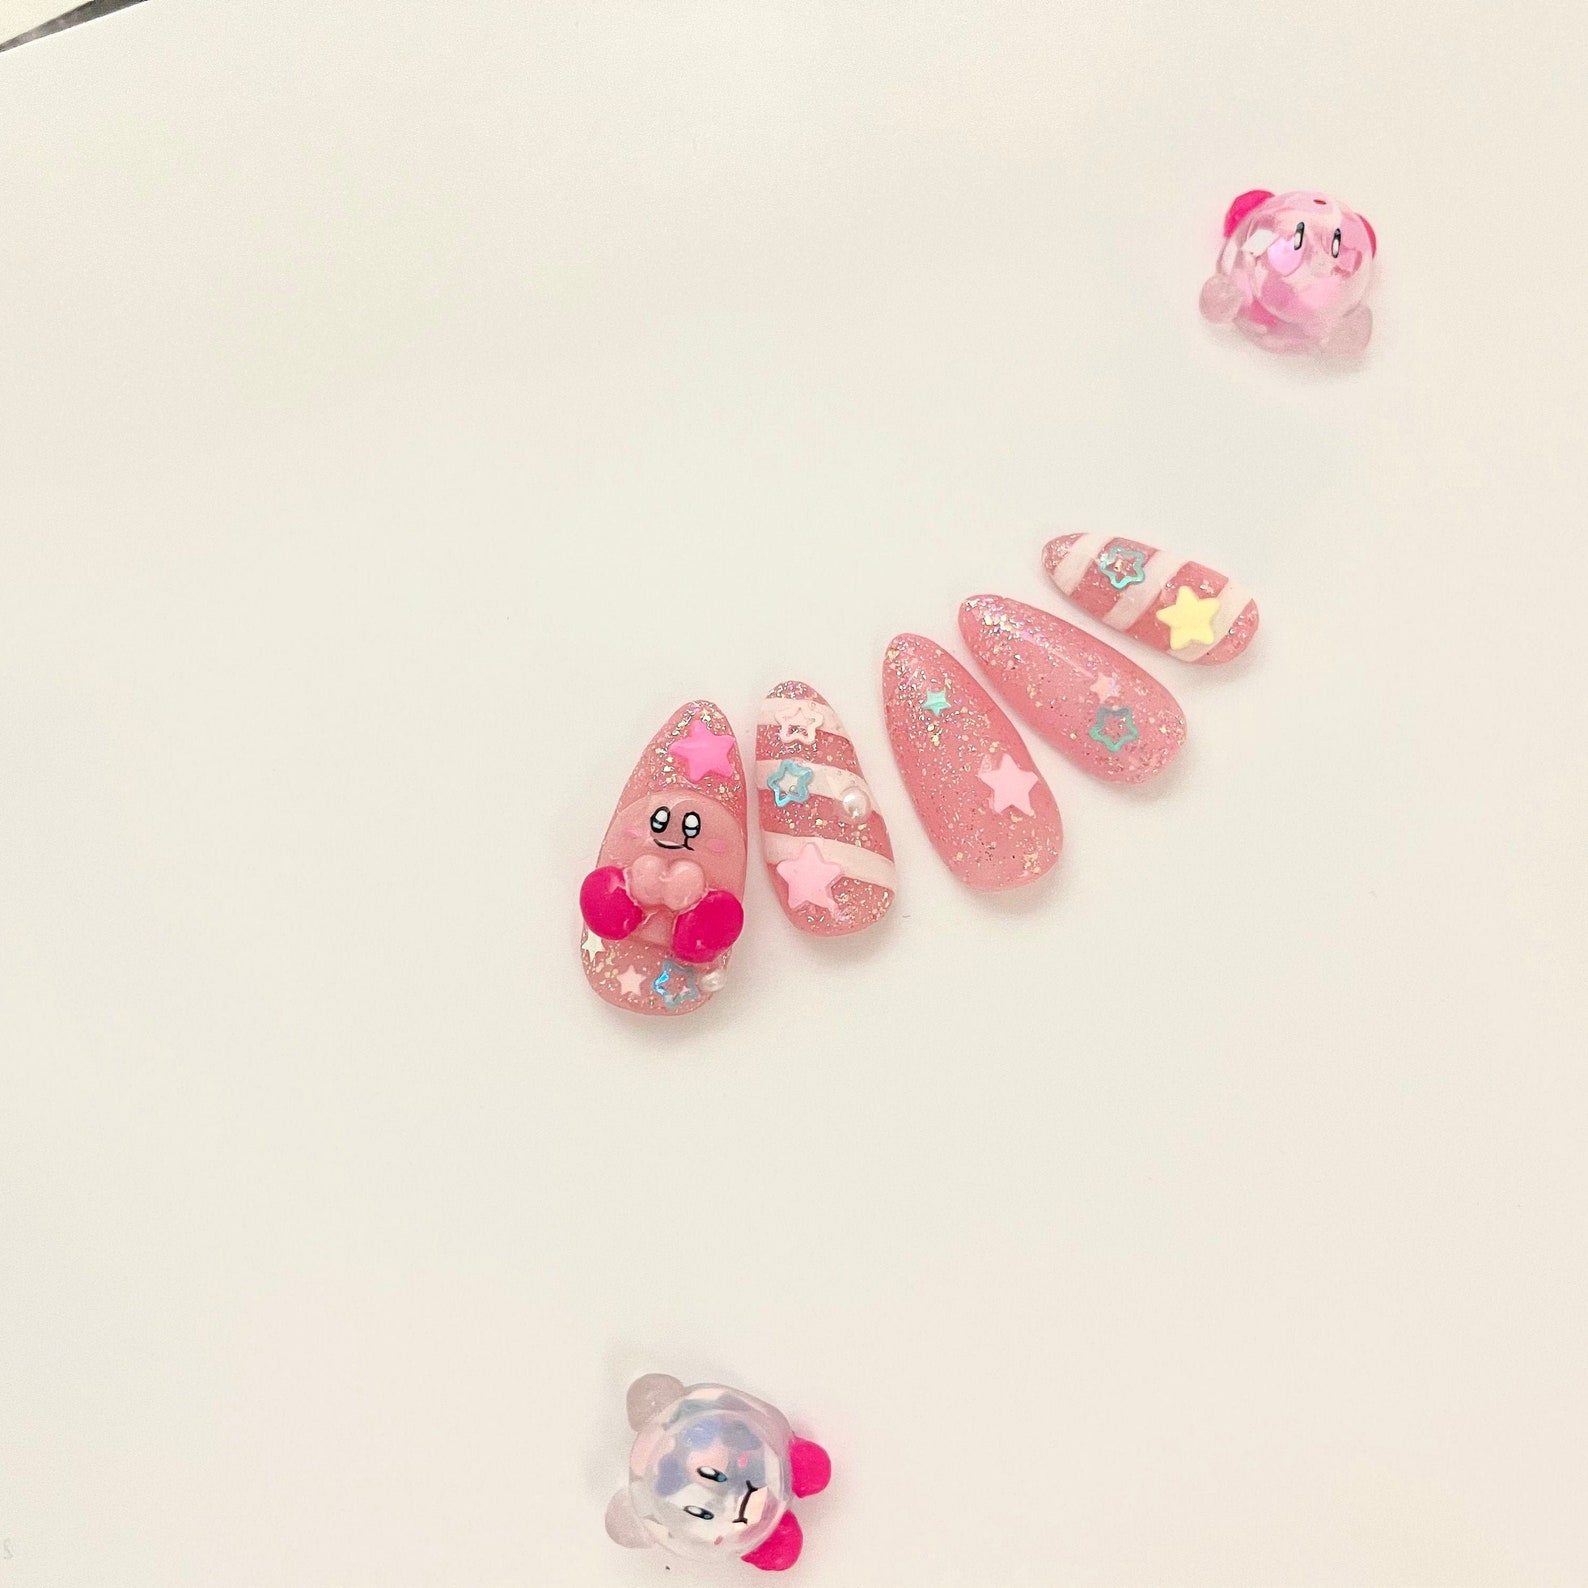 3D Kirby Nails Gift to Birthday Luxury Press on Nail in | Etsy